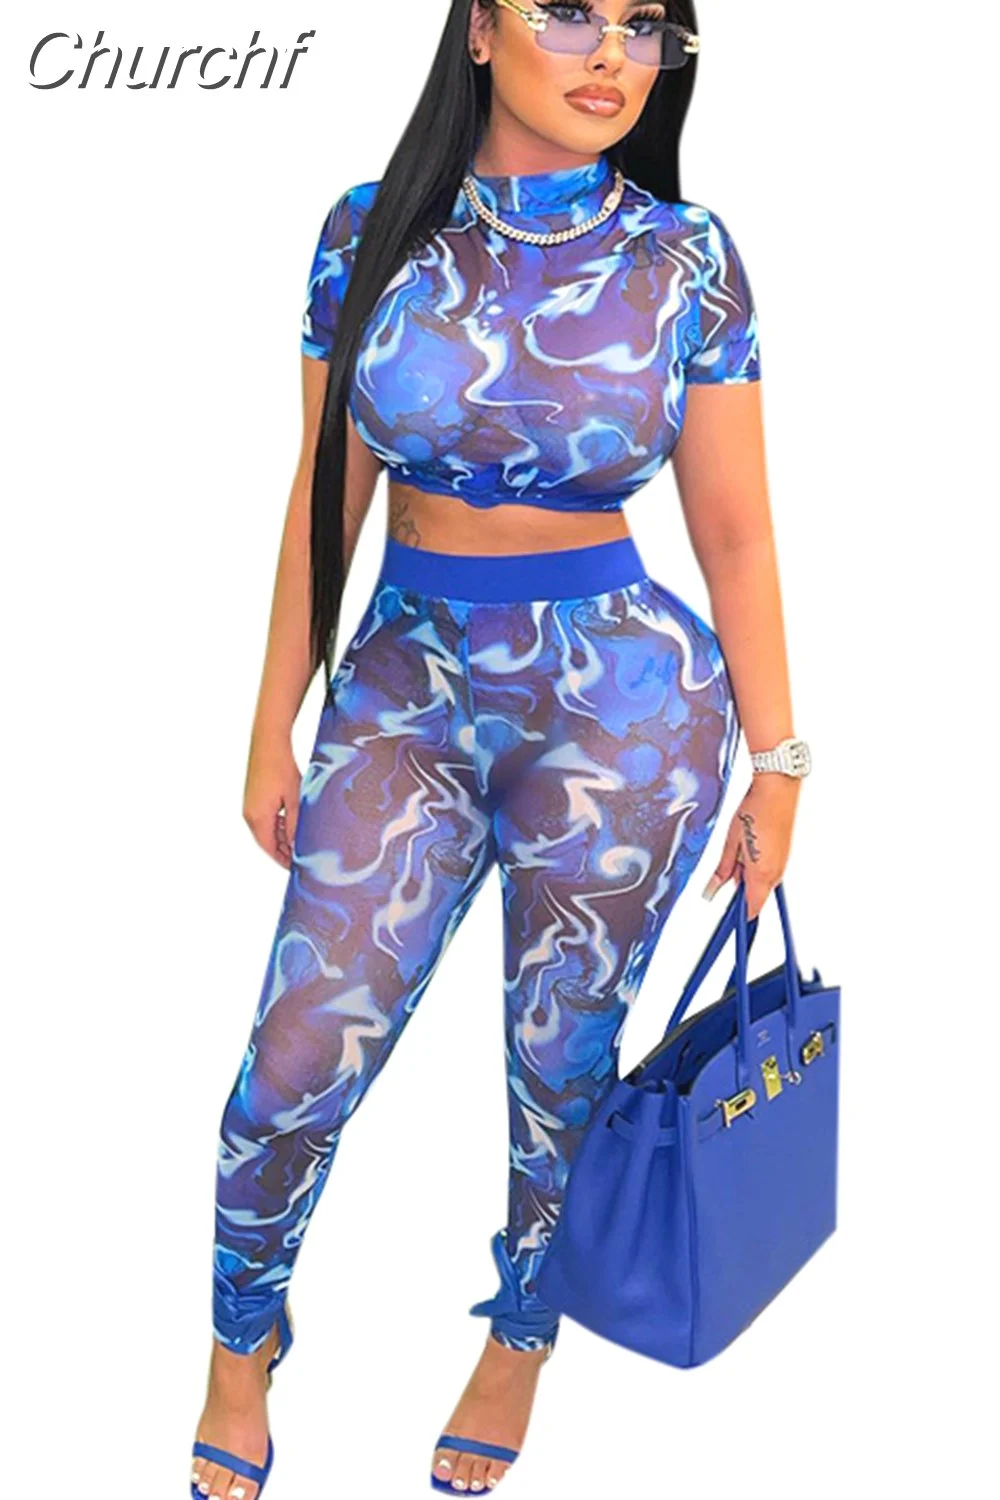 Churchf Mesh Leggings and Crop Top Sexy Two Piece Pants Sets Summer Outfits for Women 2023 Club Wear Matching Sets D85-CZ16